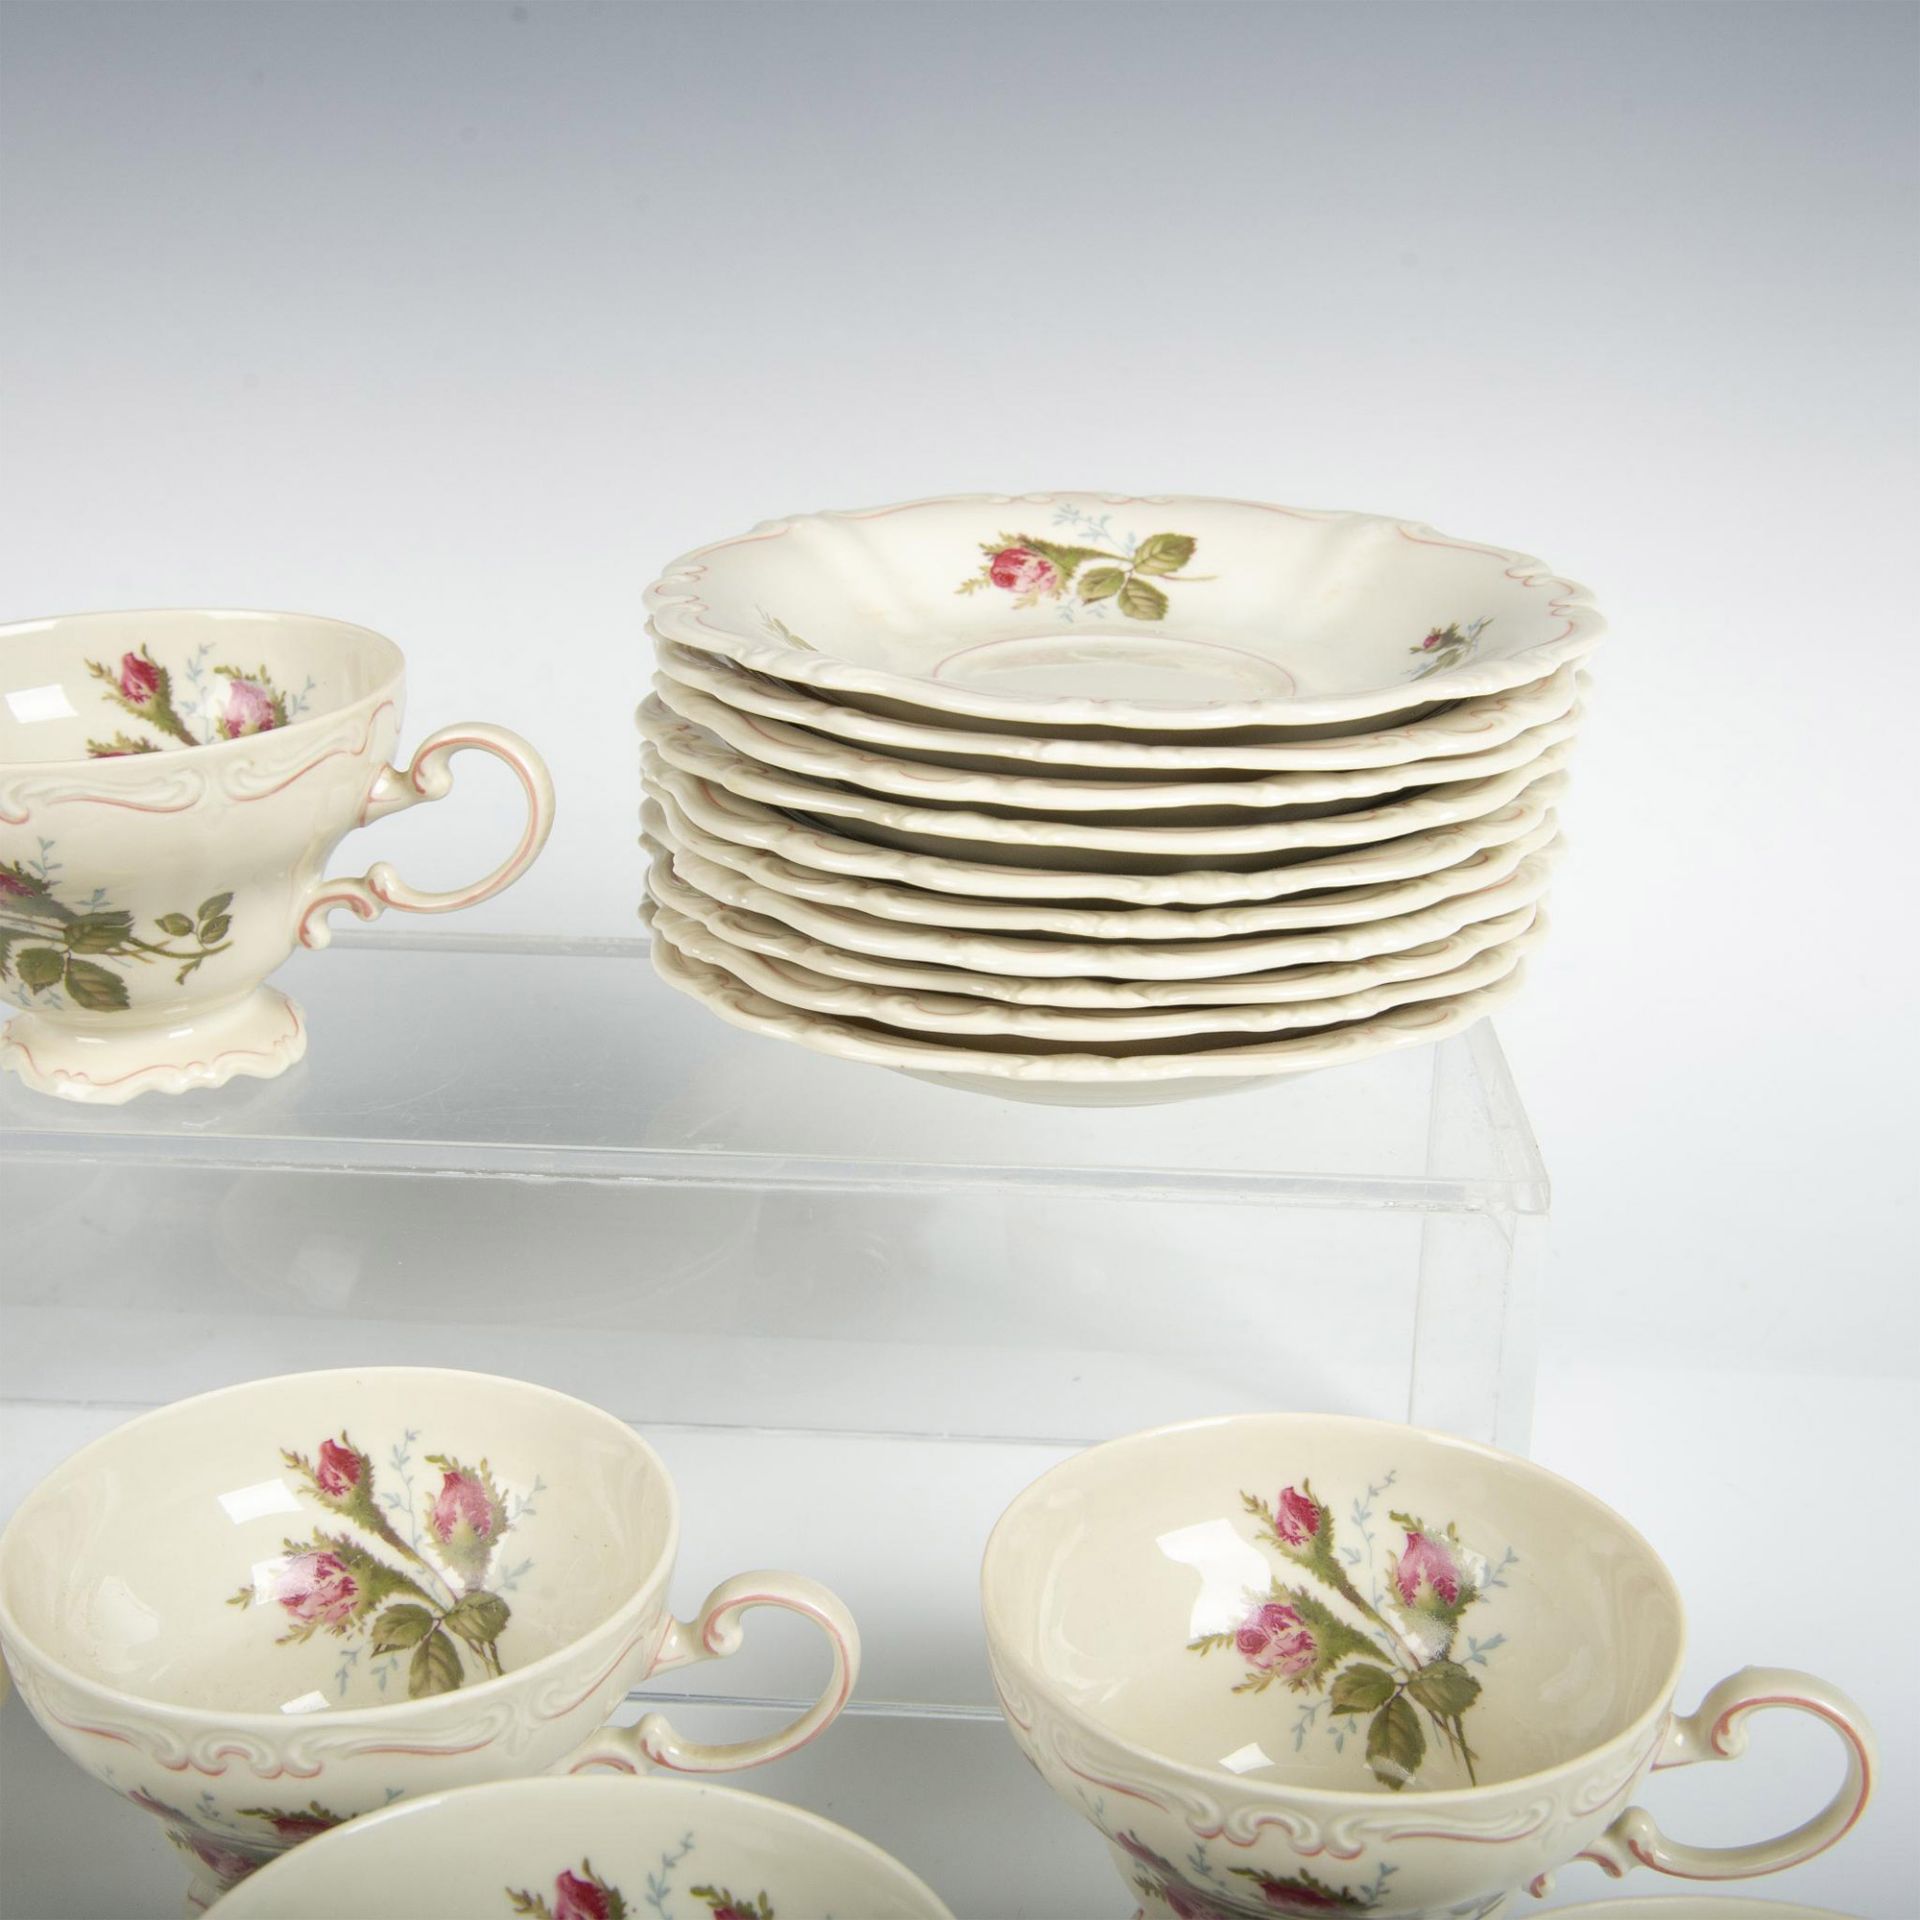 24pc Rosenthal Pompadour Moss Rose Teacups and Saucers - Image 2 of 4